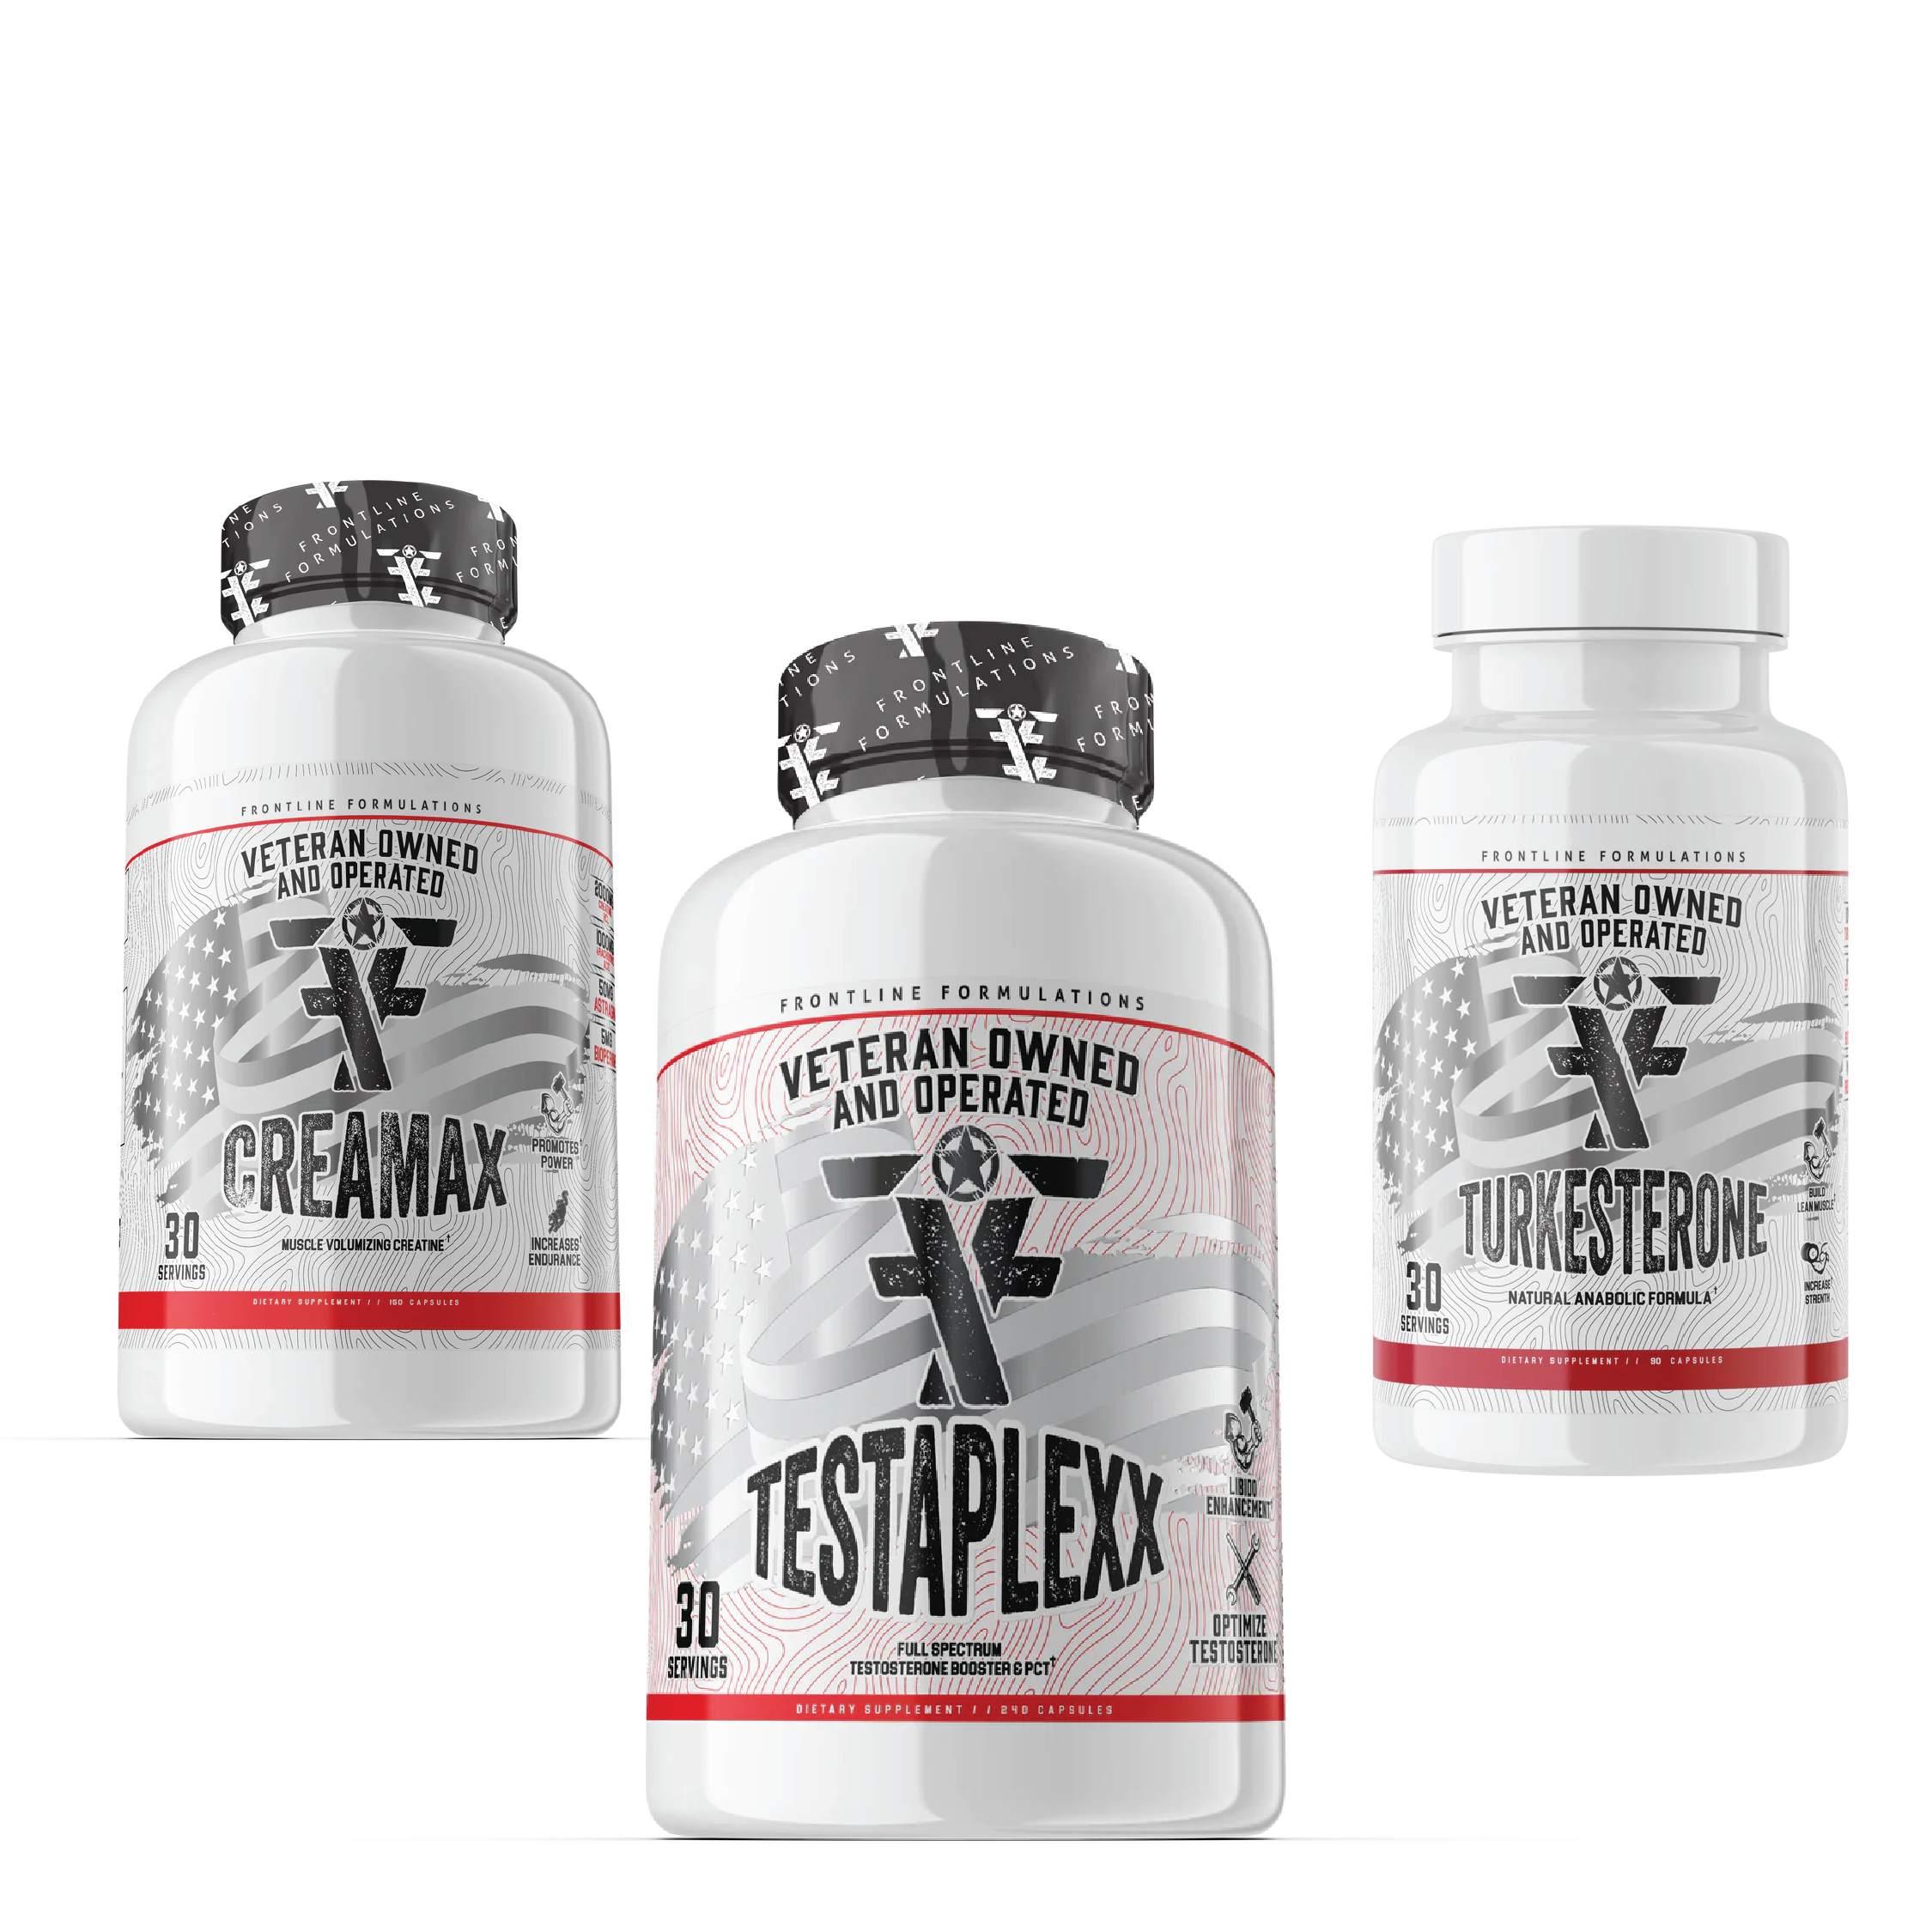 Ultimate Muscle Stack TESTAPLEX: Unlock your potential with Testaplex—a comprehensive blend of ingredients designed to support men's health. Testaplex nourishes various aspects including libido, prostate health, cholesterol levels, liver function, kidney